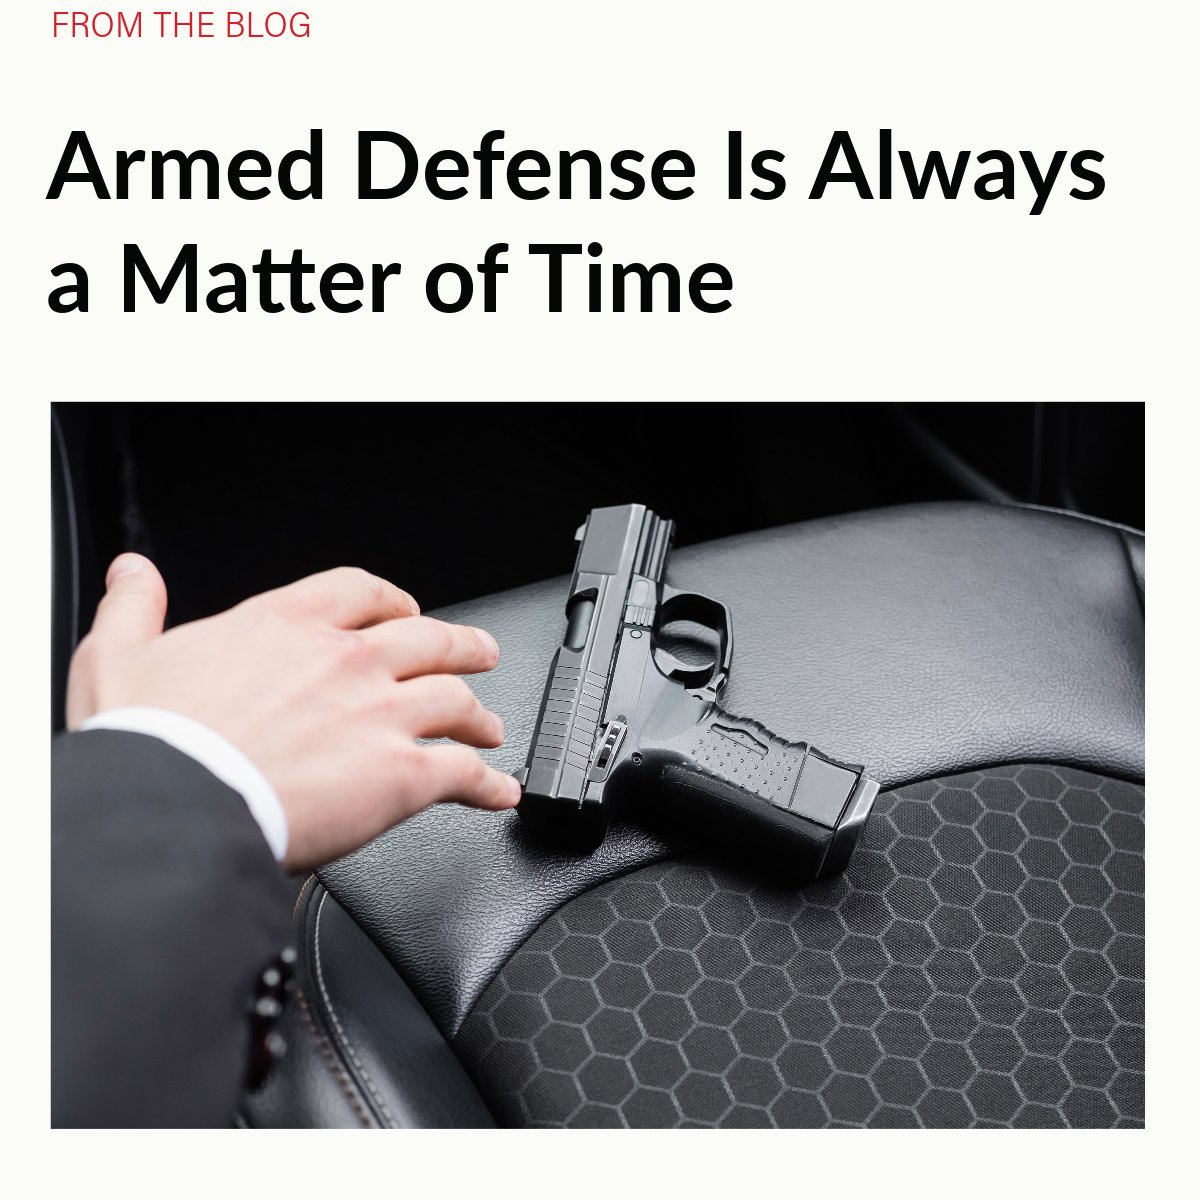 Should your #selfdefense gun be unloaded? Should you only carry a firearm when going someplace dangerous? Learn how common bad advice for #responsiblegunowners could increase your risk of not surviving an attack: secondcalldefense.org/armed-defense-…